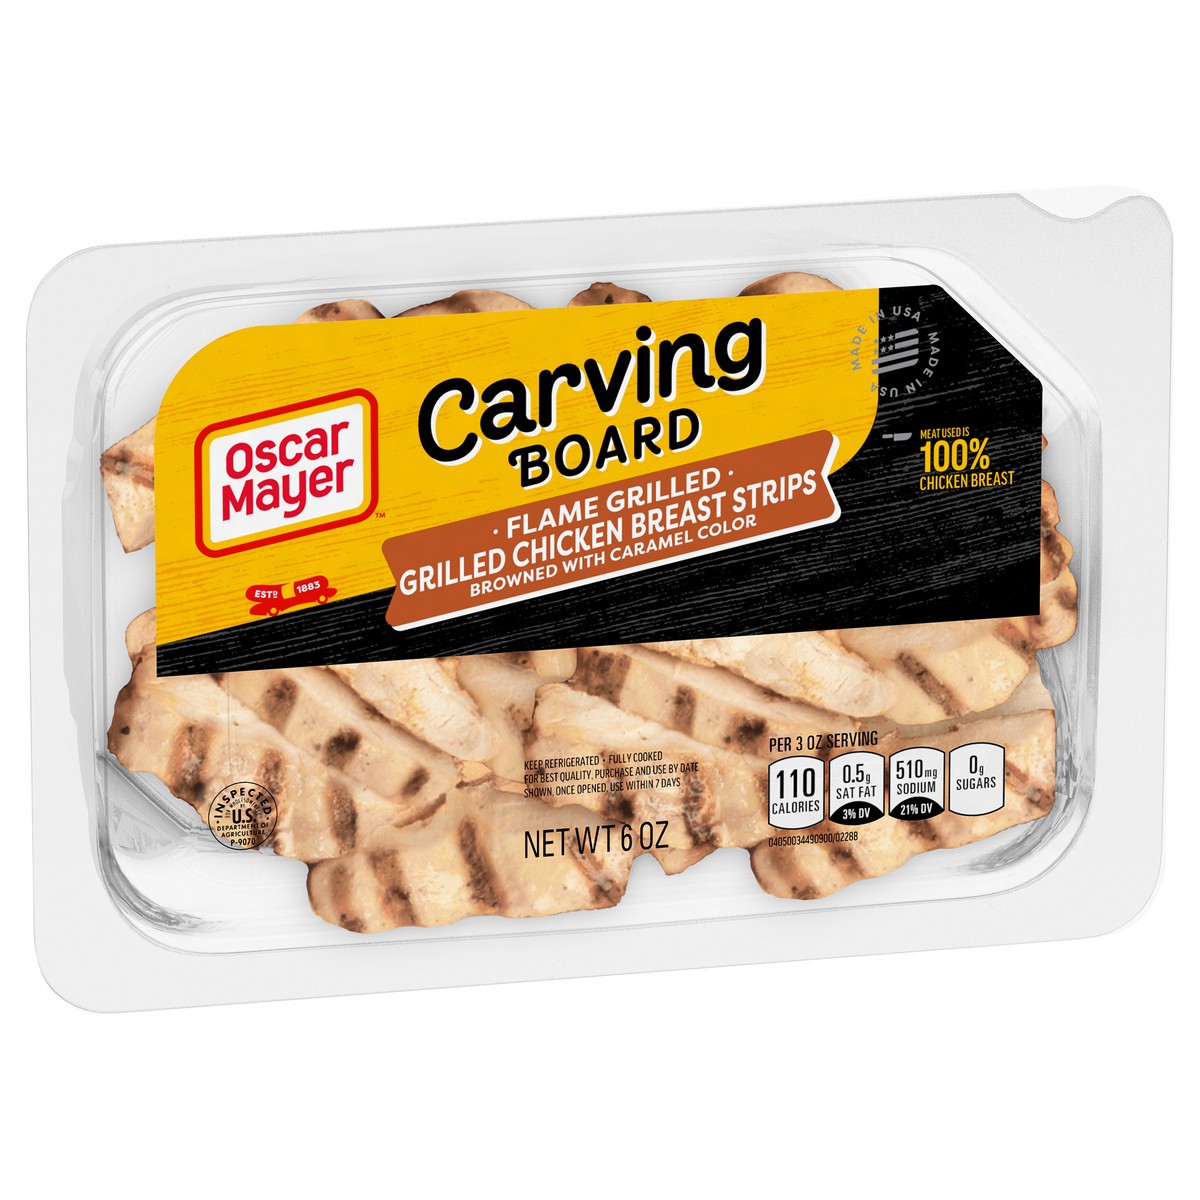 slide 4 of 9, Oscar Mayer Carving Board Flame Grilled Chicken Breast Strips Lunch Meat, 6 oz. Tray, 6 oz